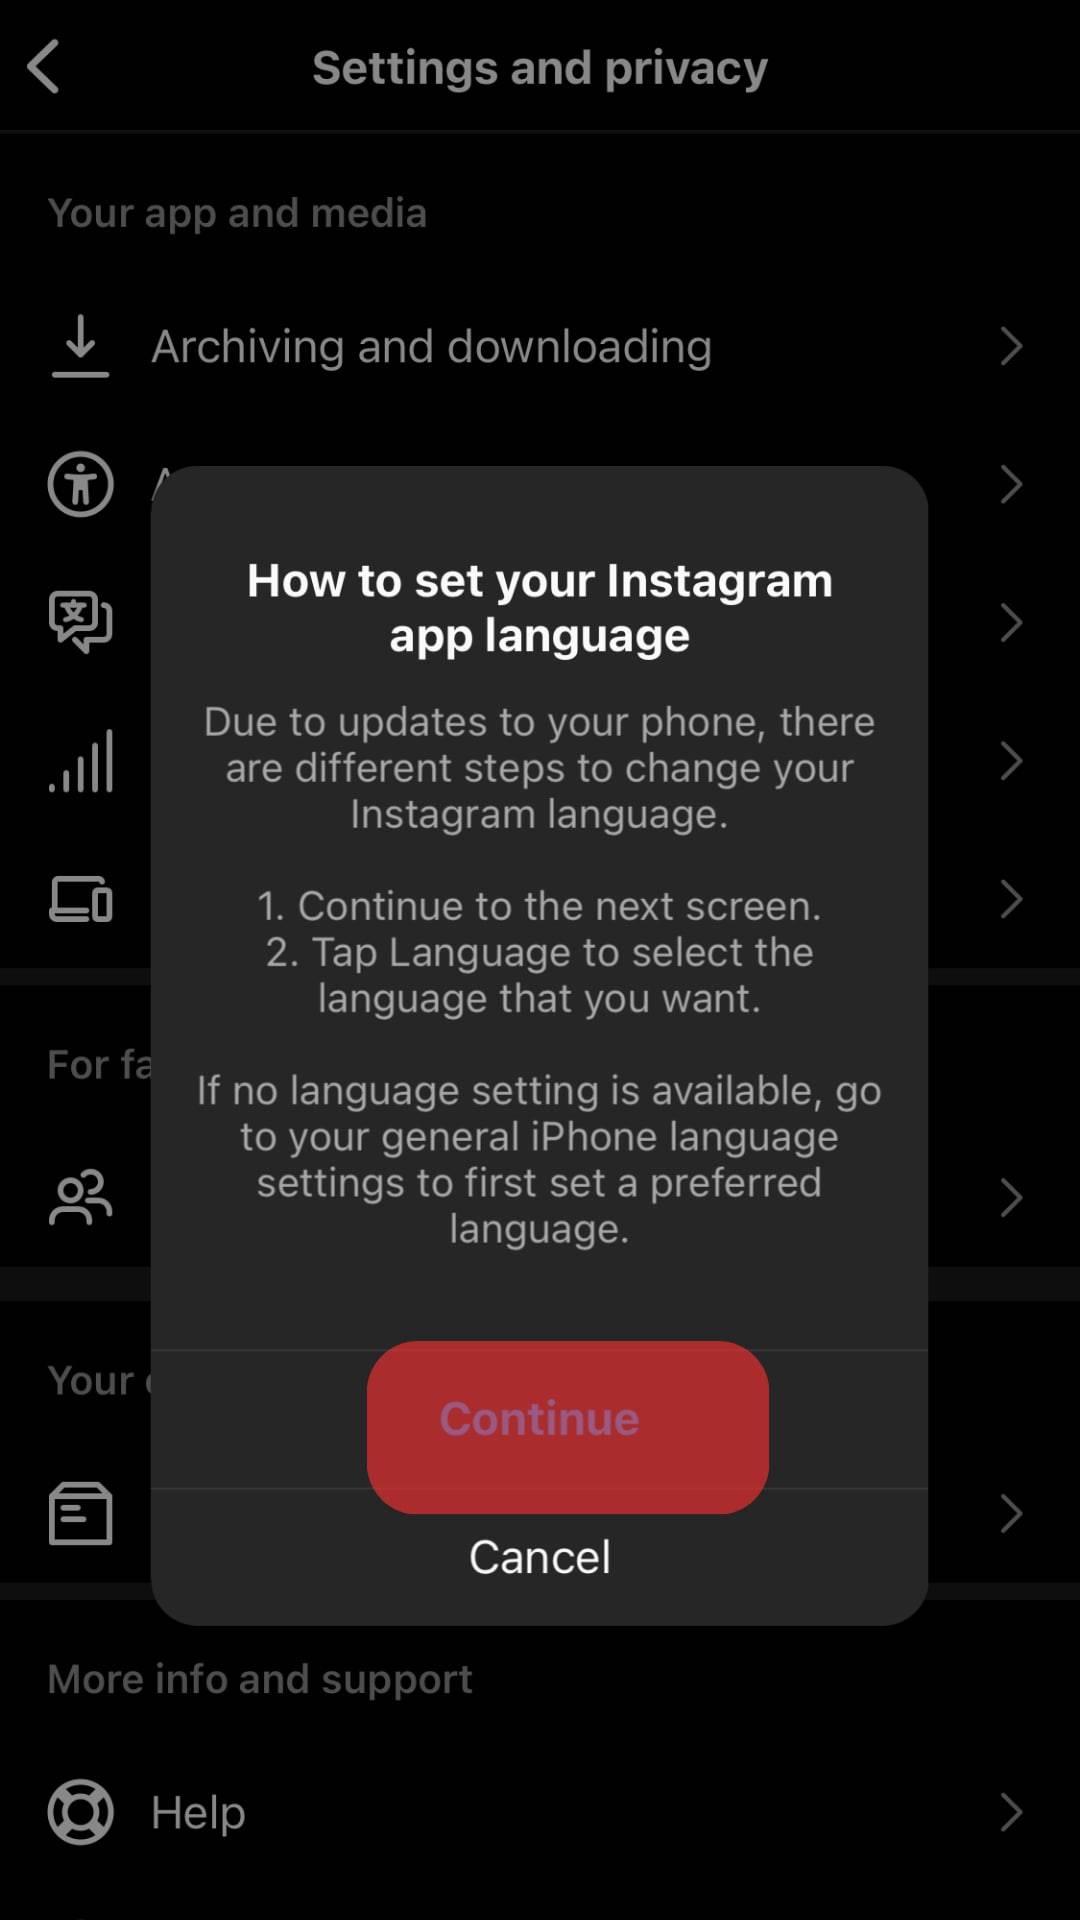 Tap On The Continue Option.